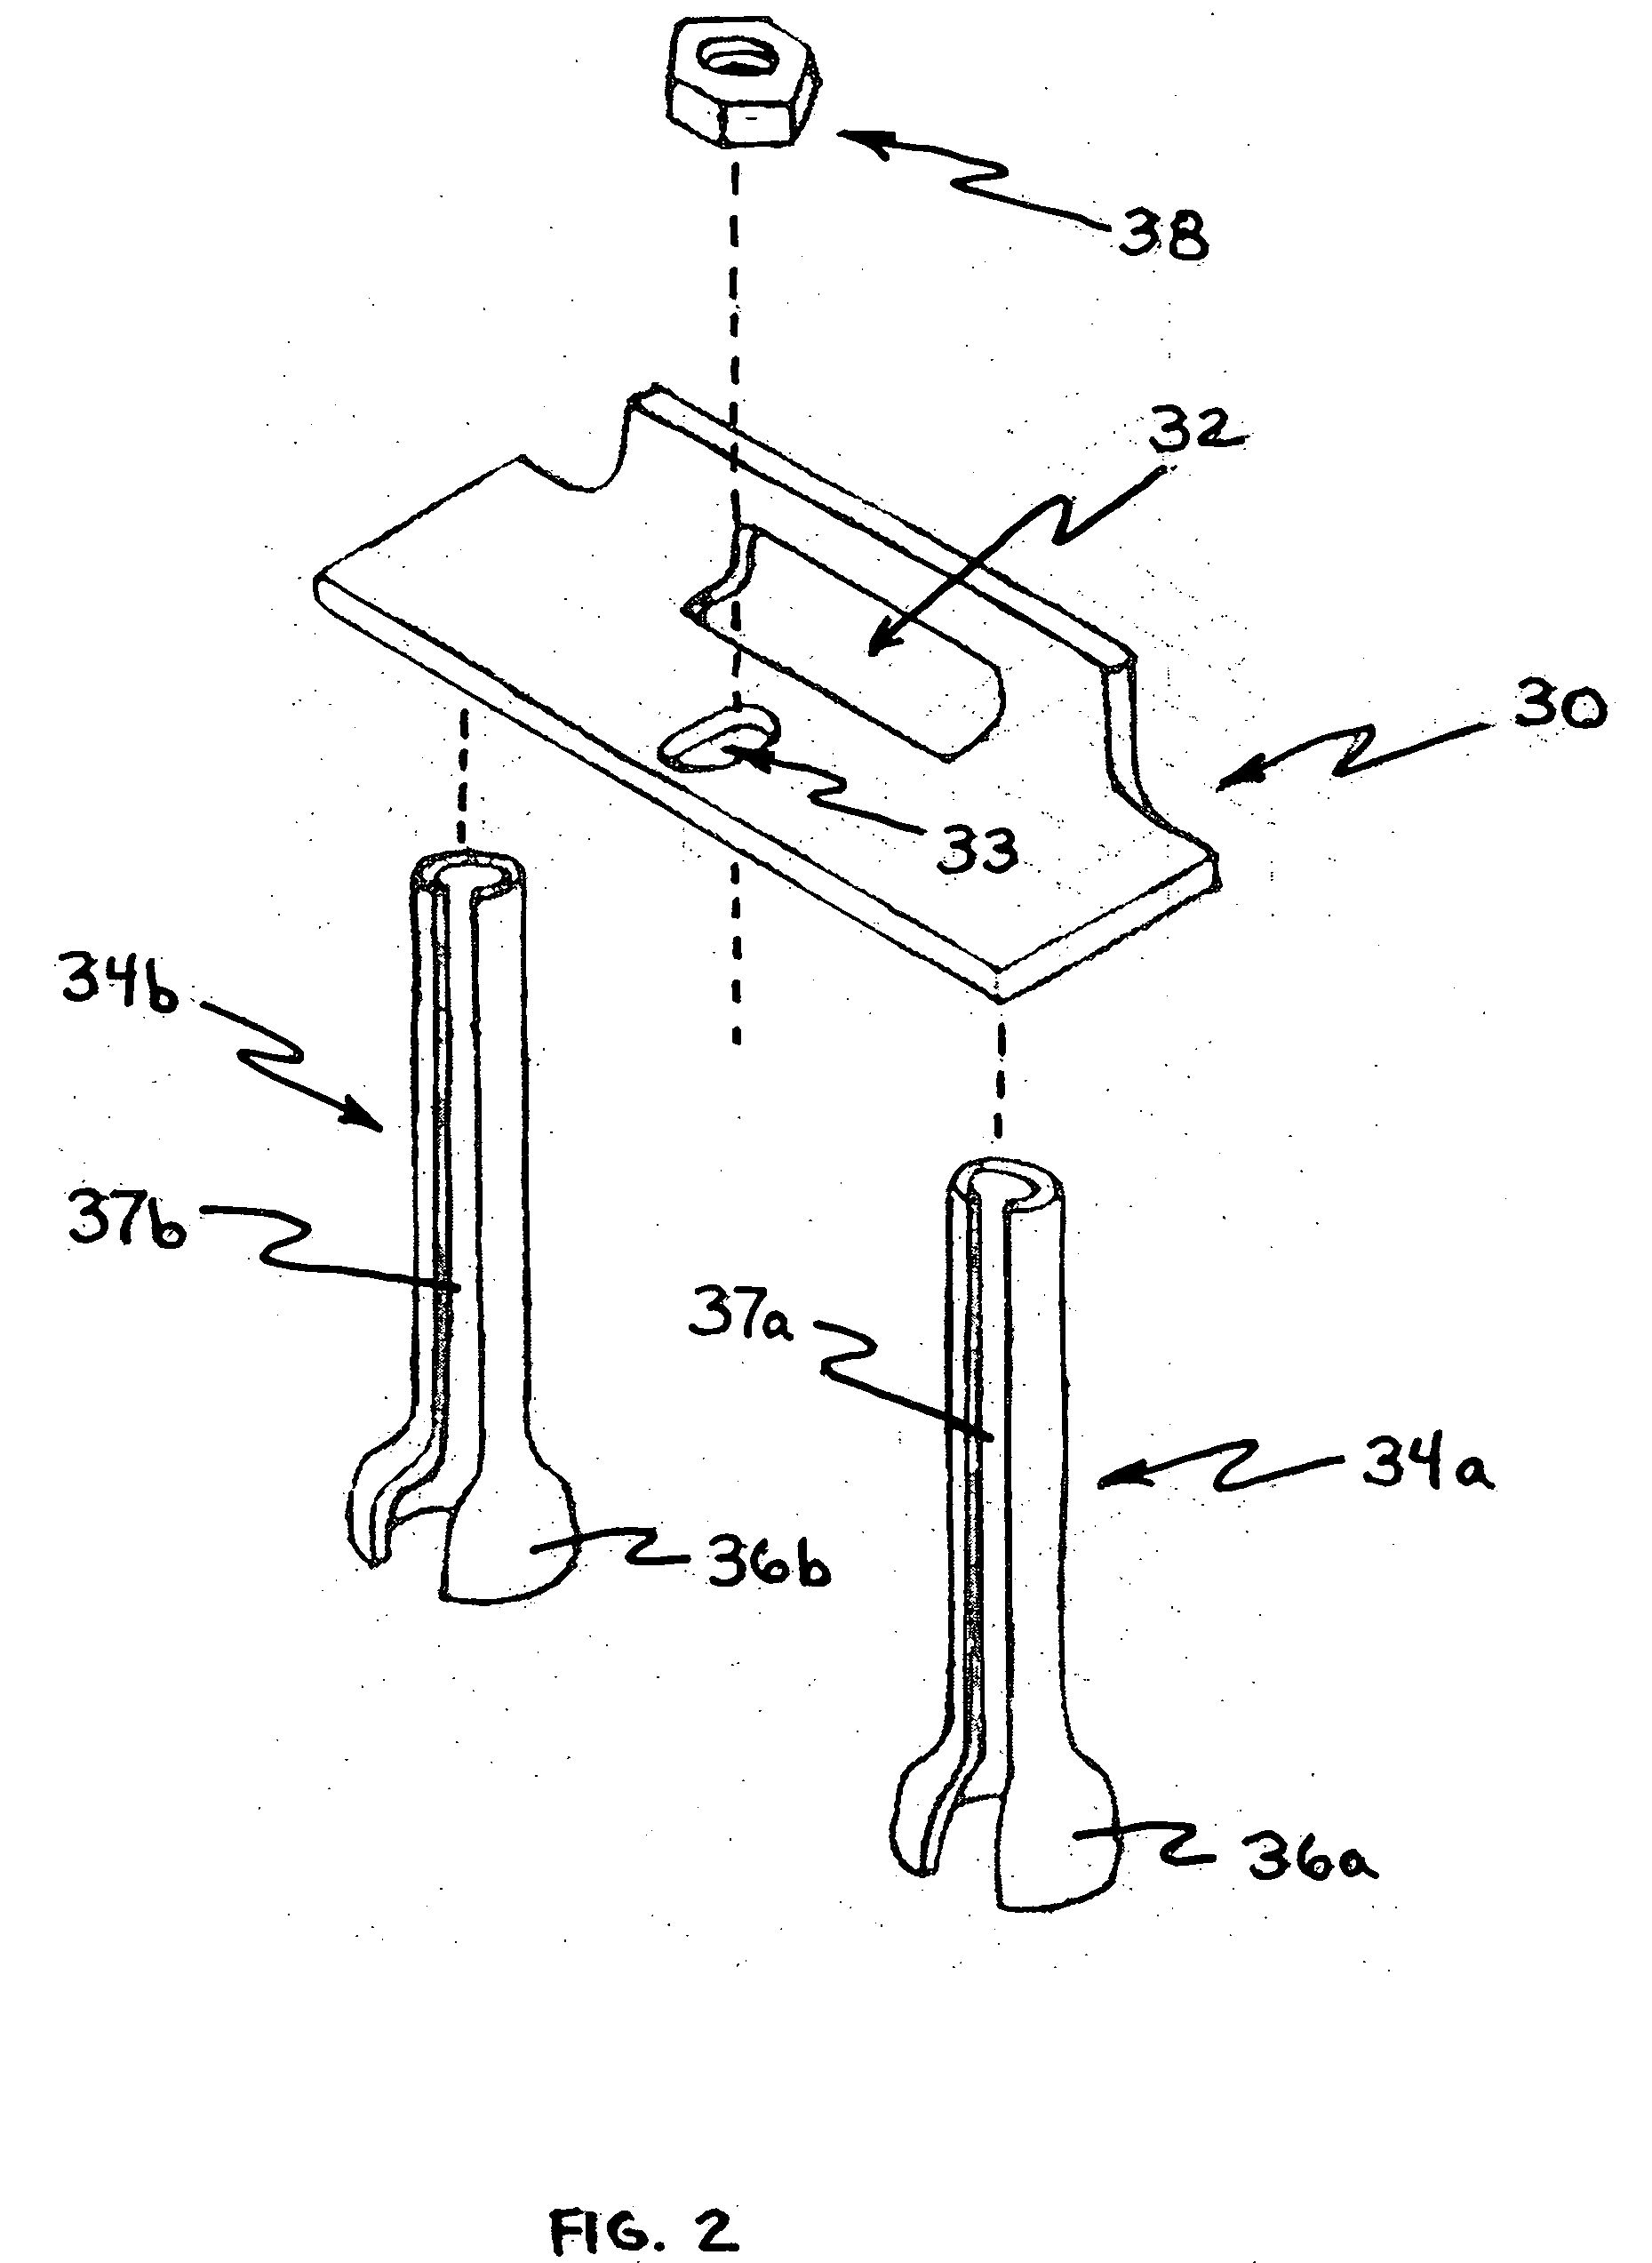 Tool for facilitating the removal and replacement of engine valve stem springs and seals